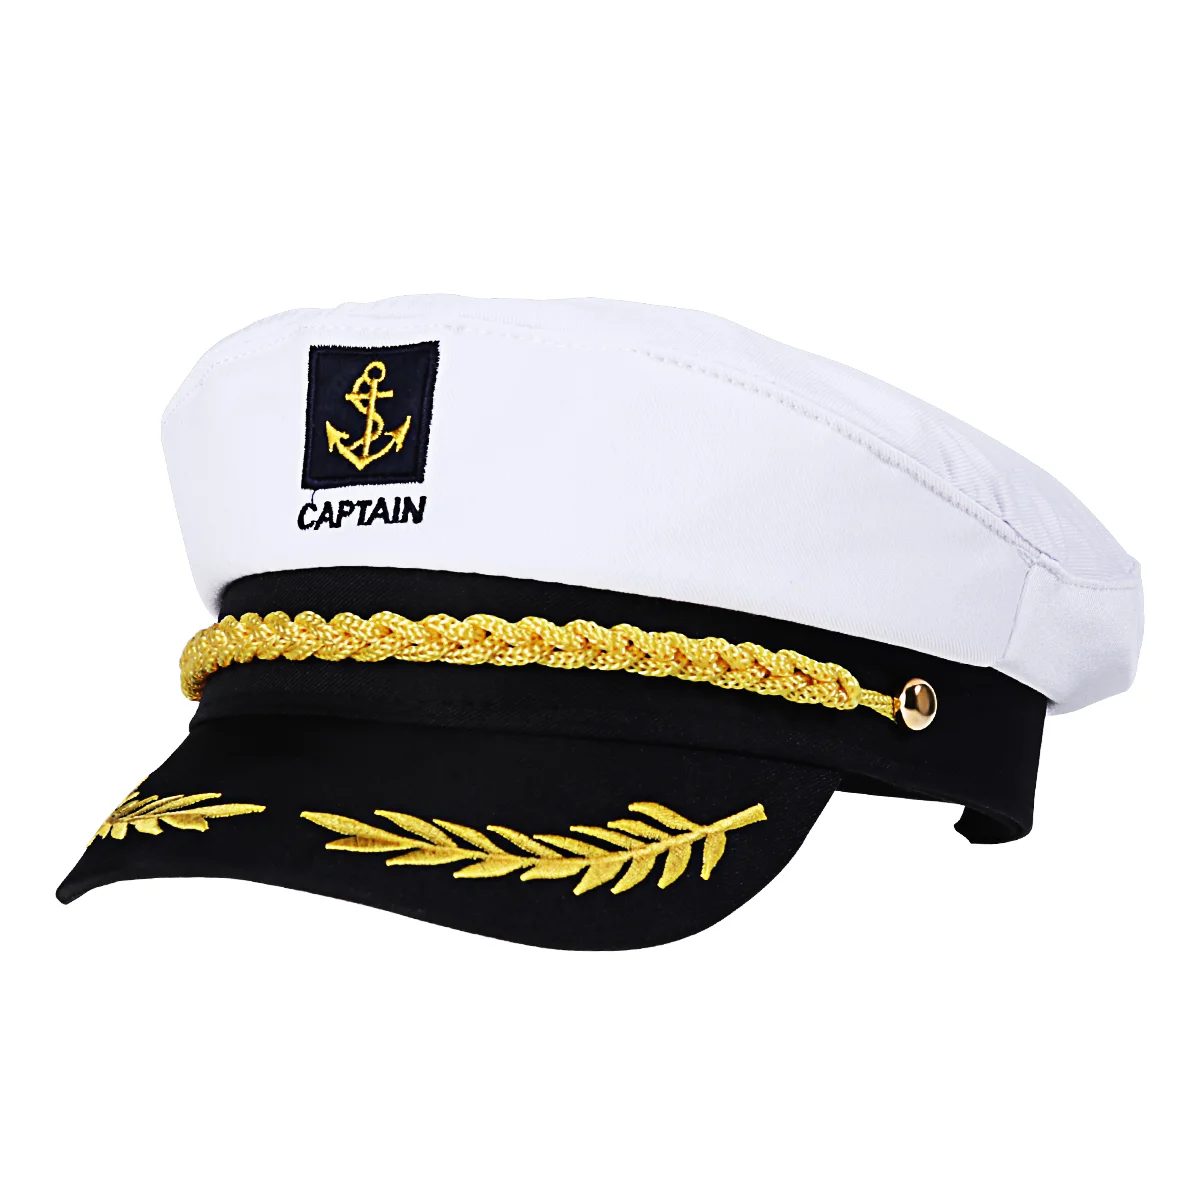 

Hat Captain Sailor Boat Captains Yacht Navy Adult Hats Costume Cap Men Ship Marine Admiral Party Nautical White Boating Theme